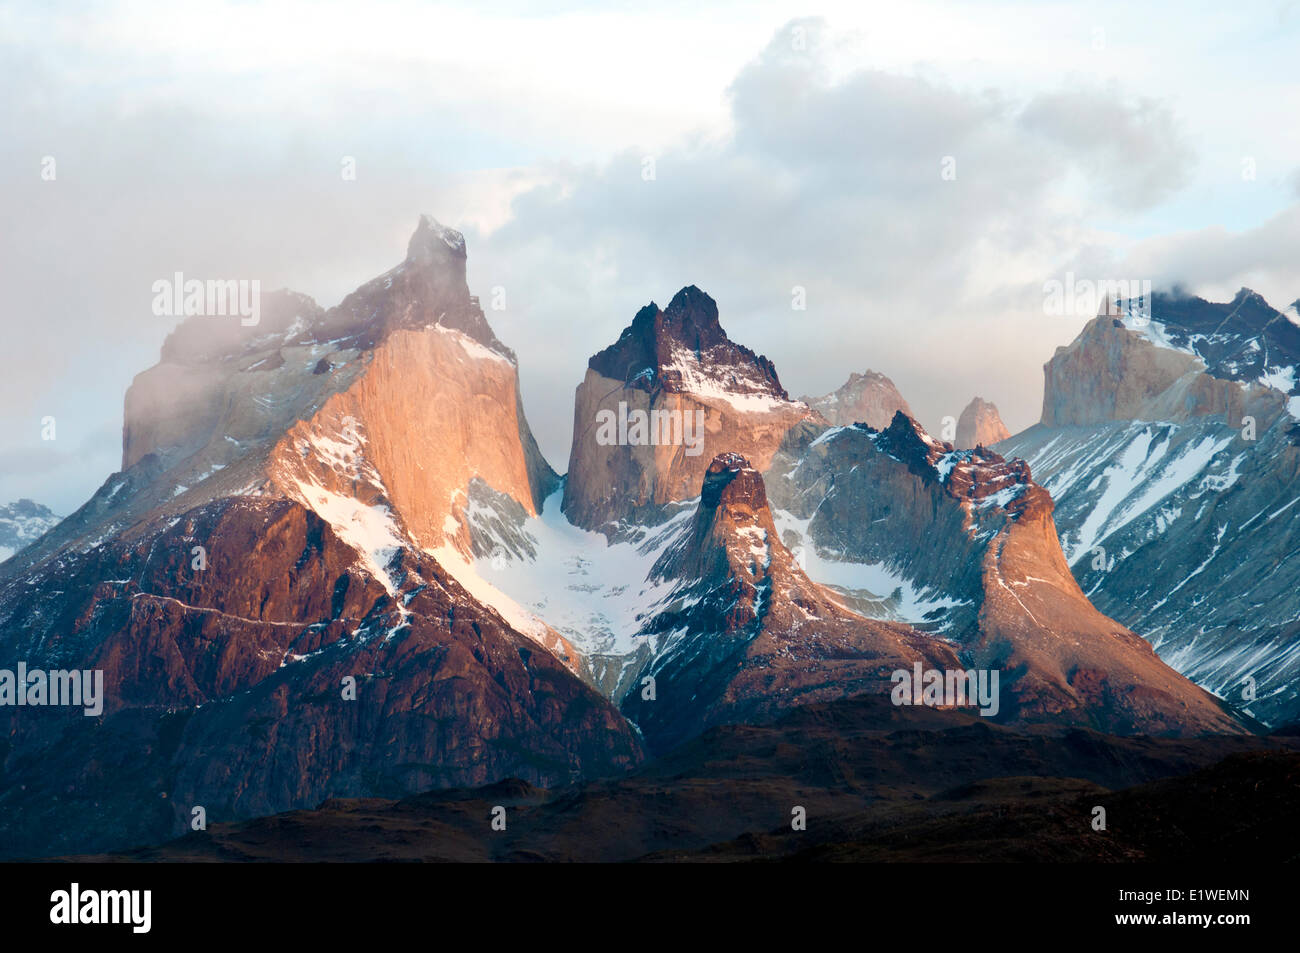 Horns of Paine, Torres del Paine National Park, southern Patagonia, Chile Stock Photo